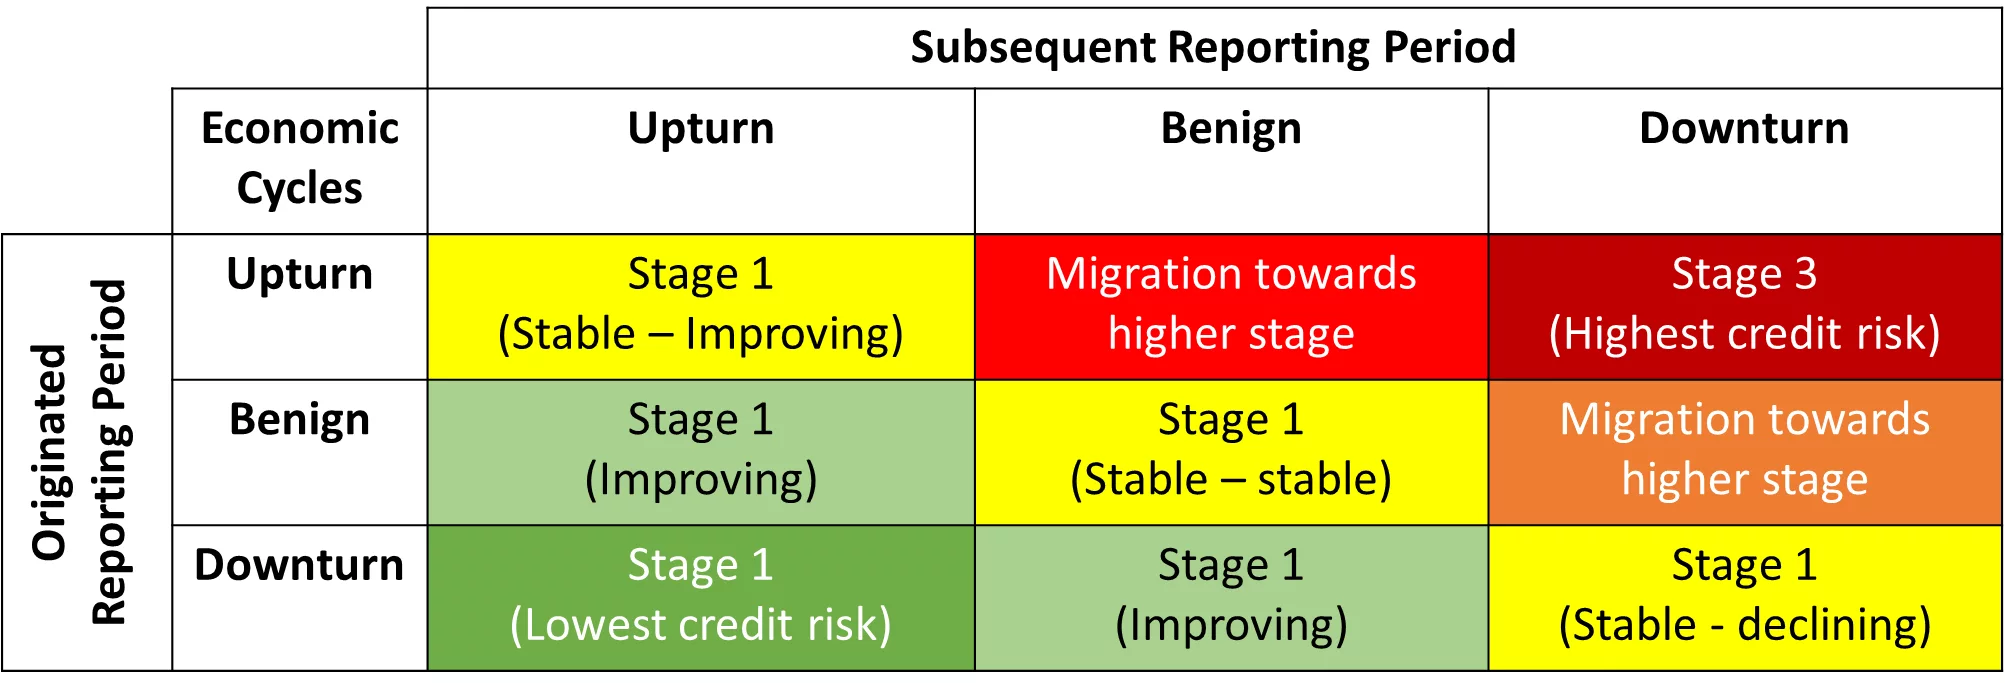 Expected Credit Loss in Different Economic Cycles. Generally, a growing loan book would result in increasing credit loss provisions, while a maturing loan book would have decreasing credit loss provisions. The impact would vary depending on the position in the economic cycle at origination (issuance or acquisition) date and the stage of the cycle at each reporting date. The migration boxes capture the transition and significant change in credit loss provisions.